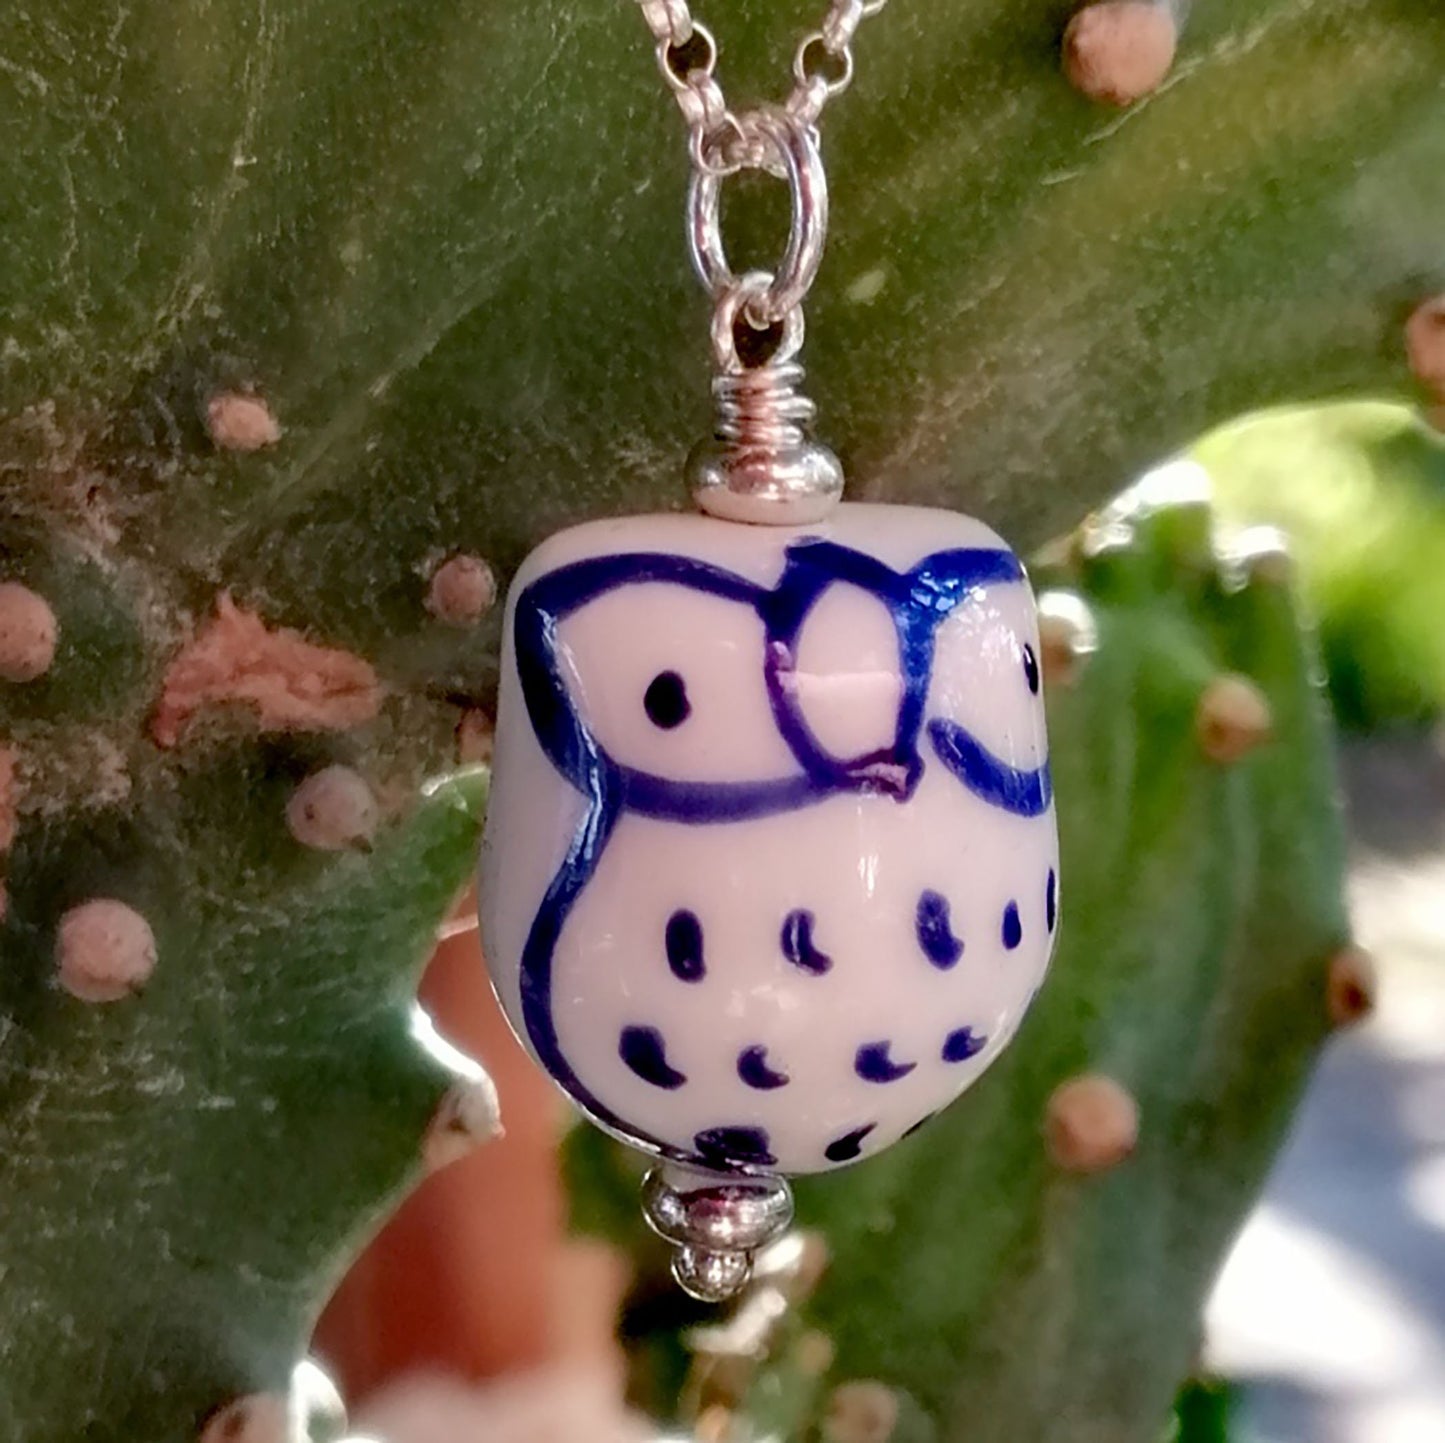 White Owl with Blue Feathers and White Eyes Necklace